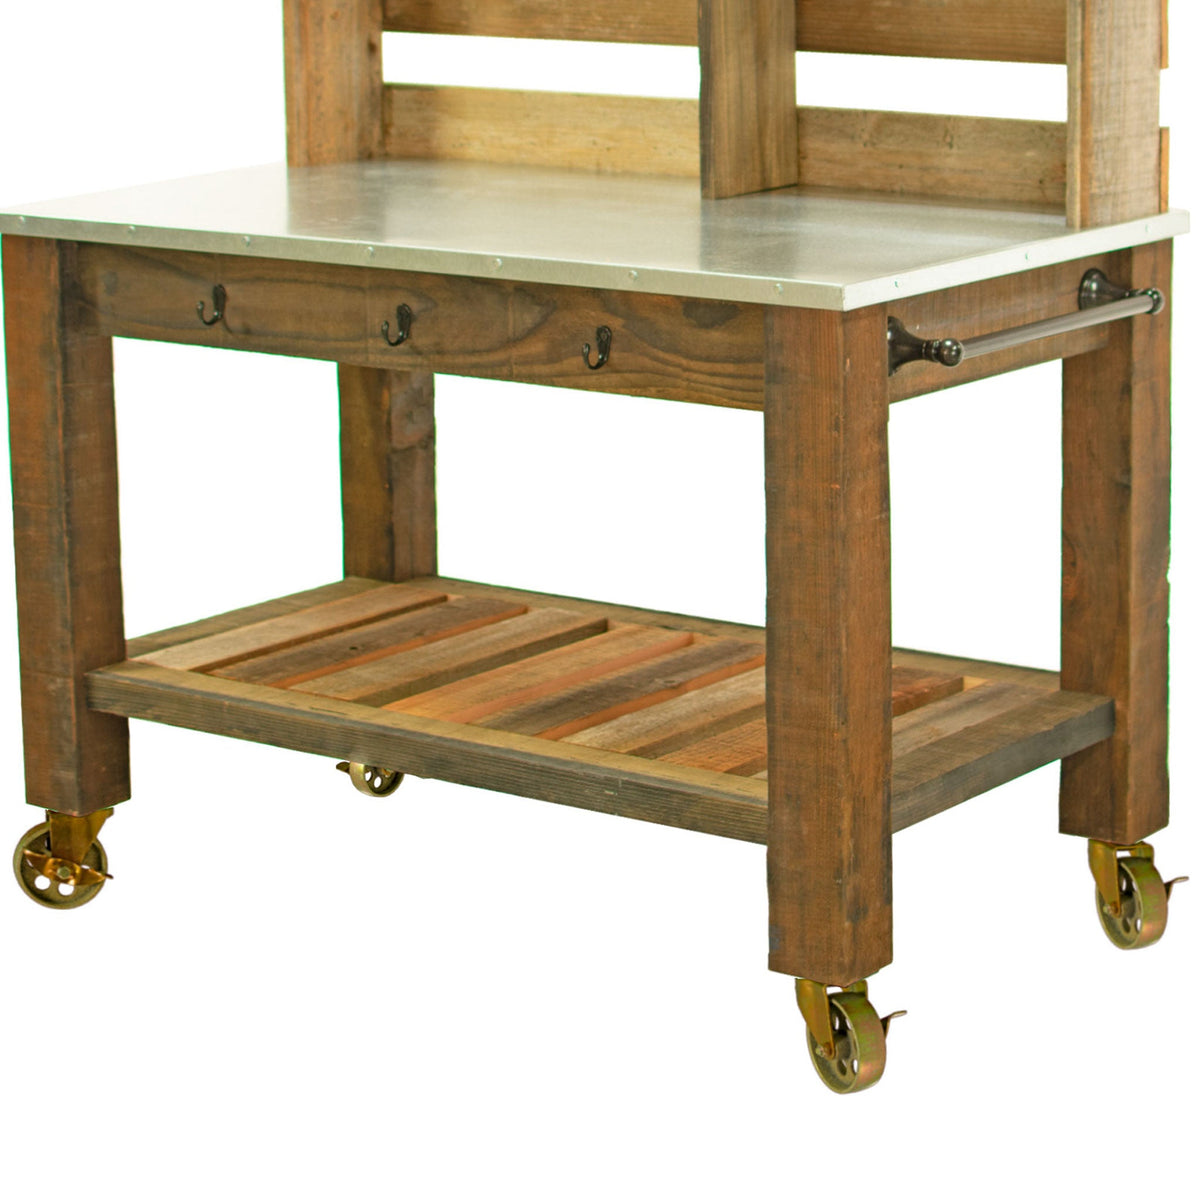 Purchase the casters we include on our Redwood Potting Tables and Outdoor Rolling Carts